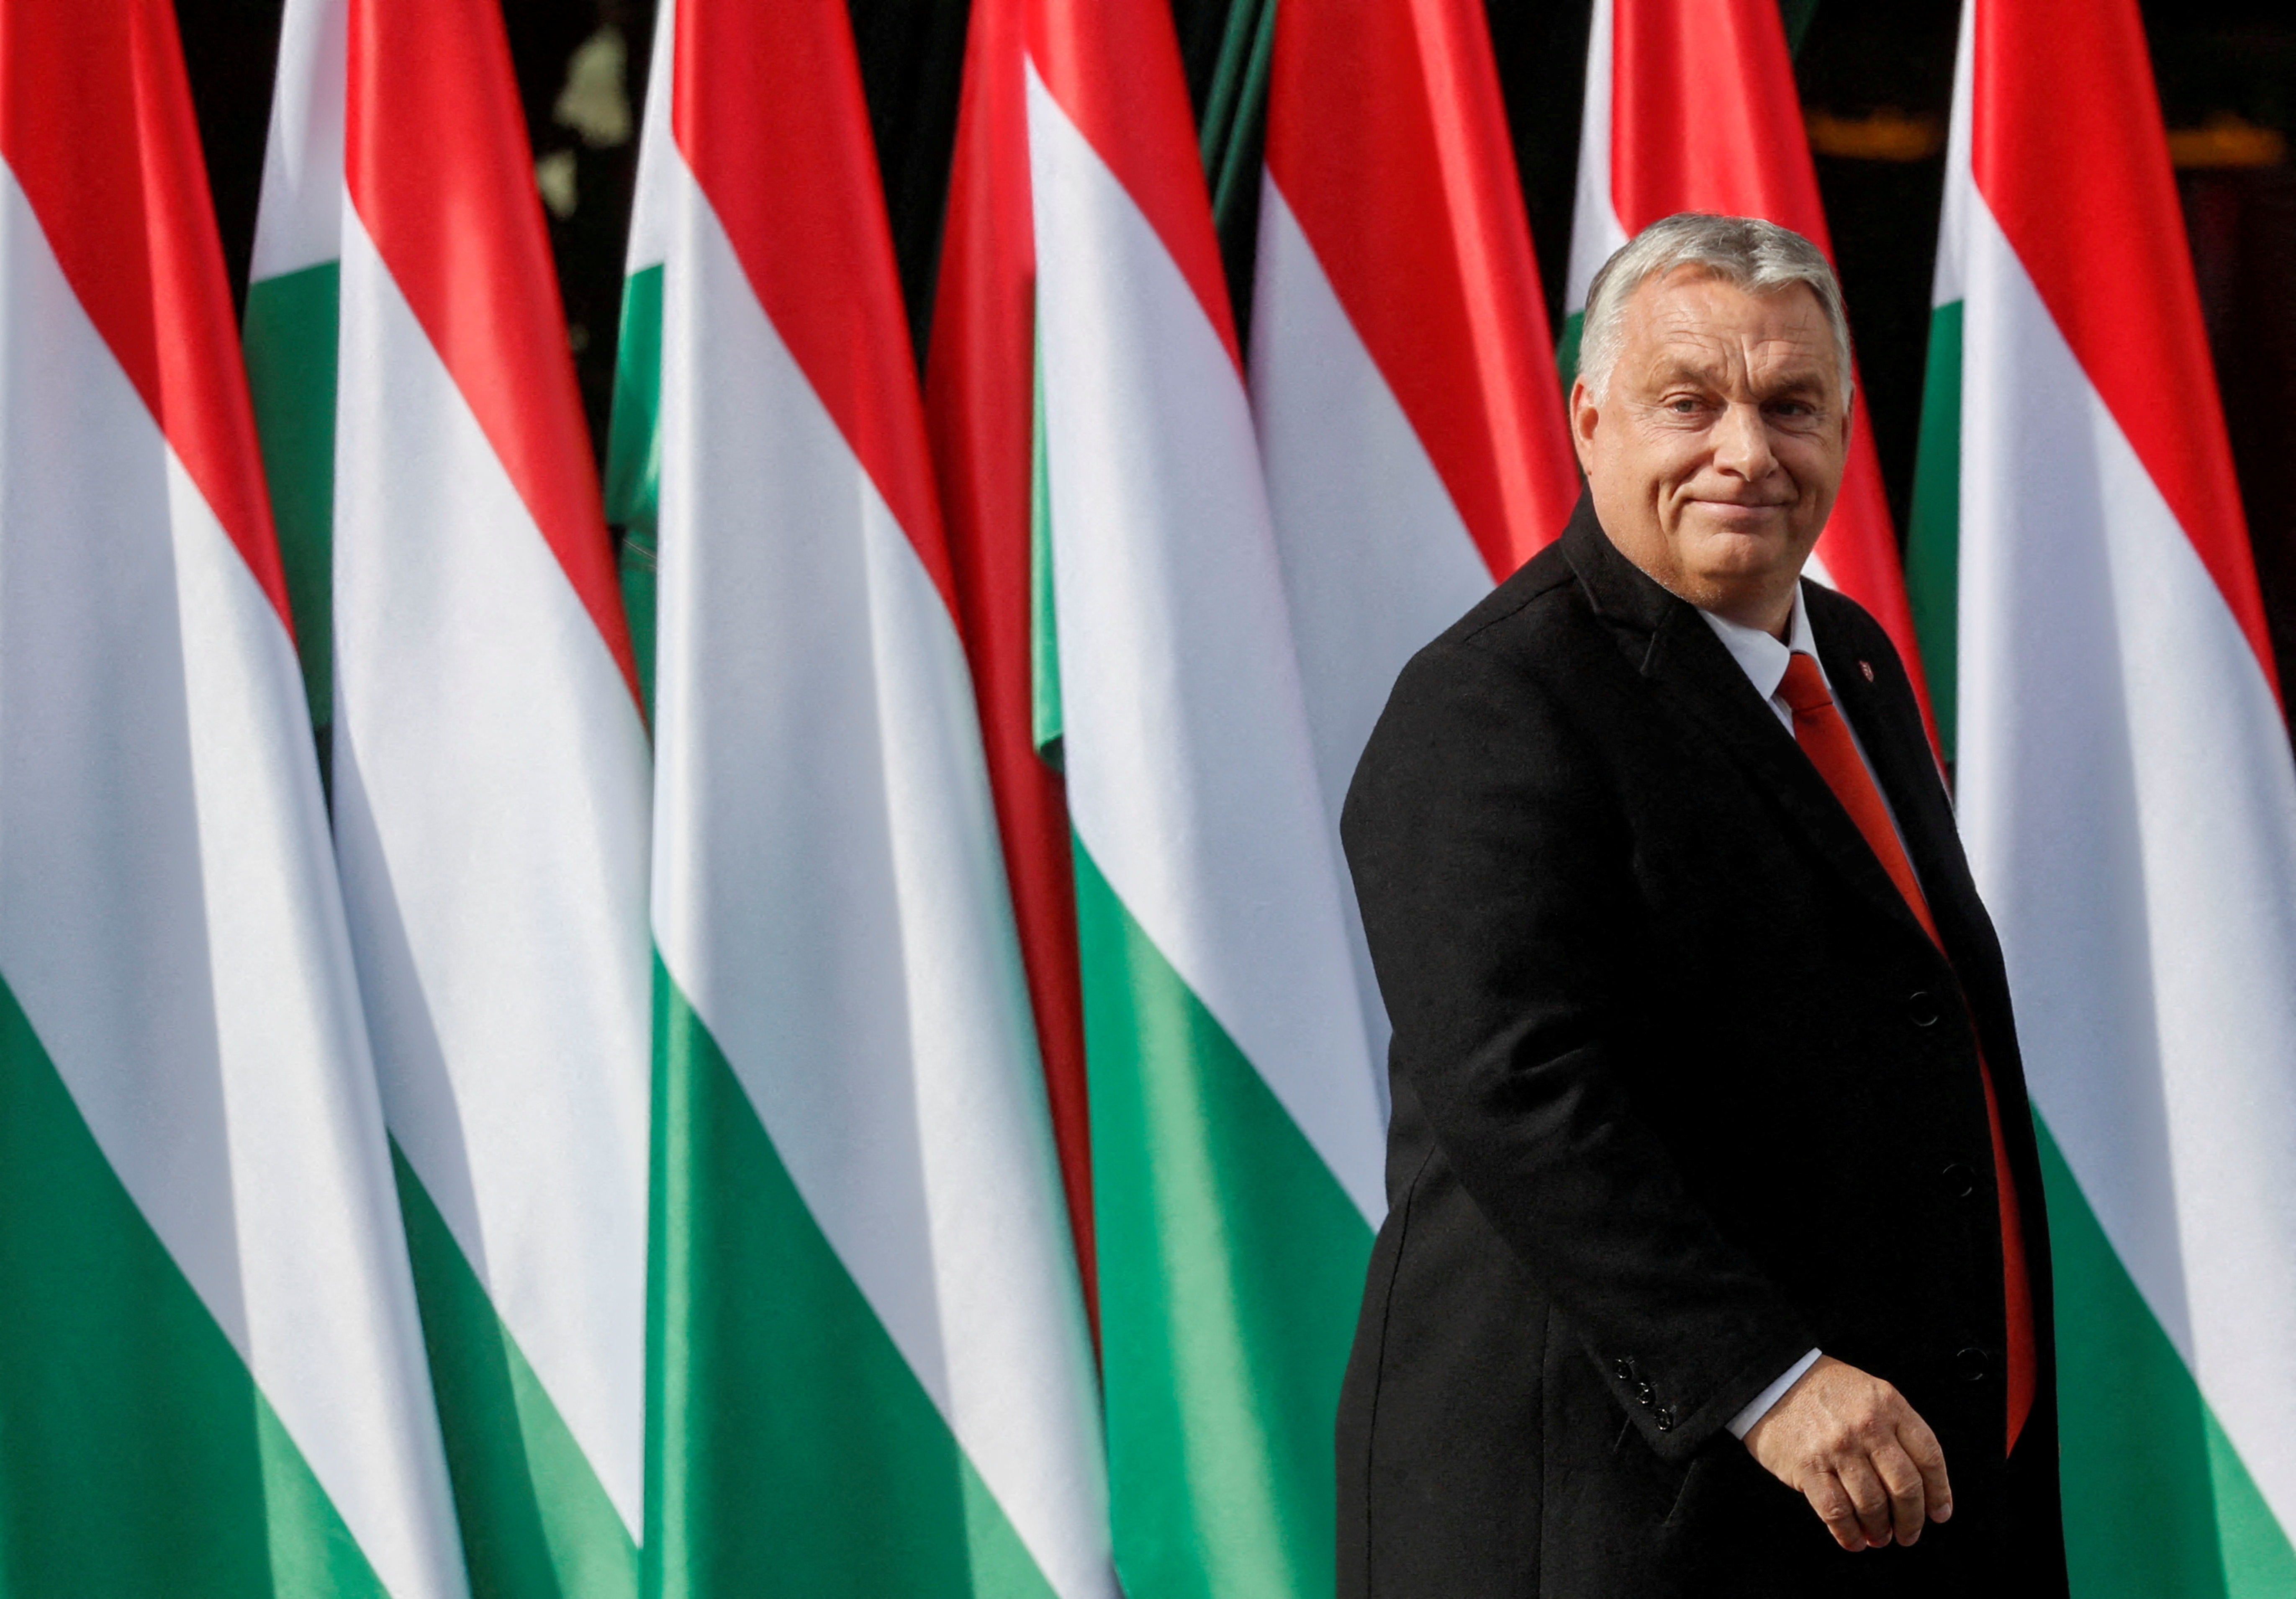 Hungarian PM Viktor Orban delivers a speech for National Day, in Zalaegerszeg